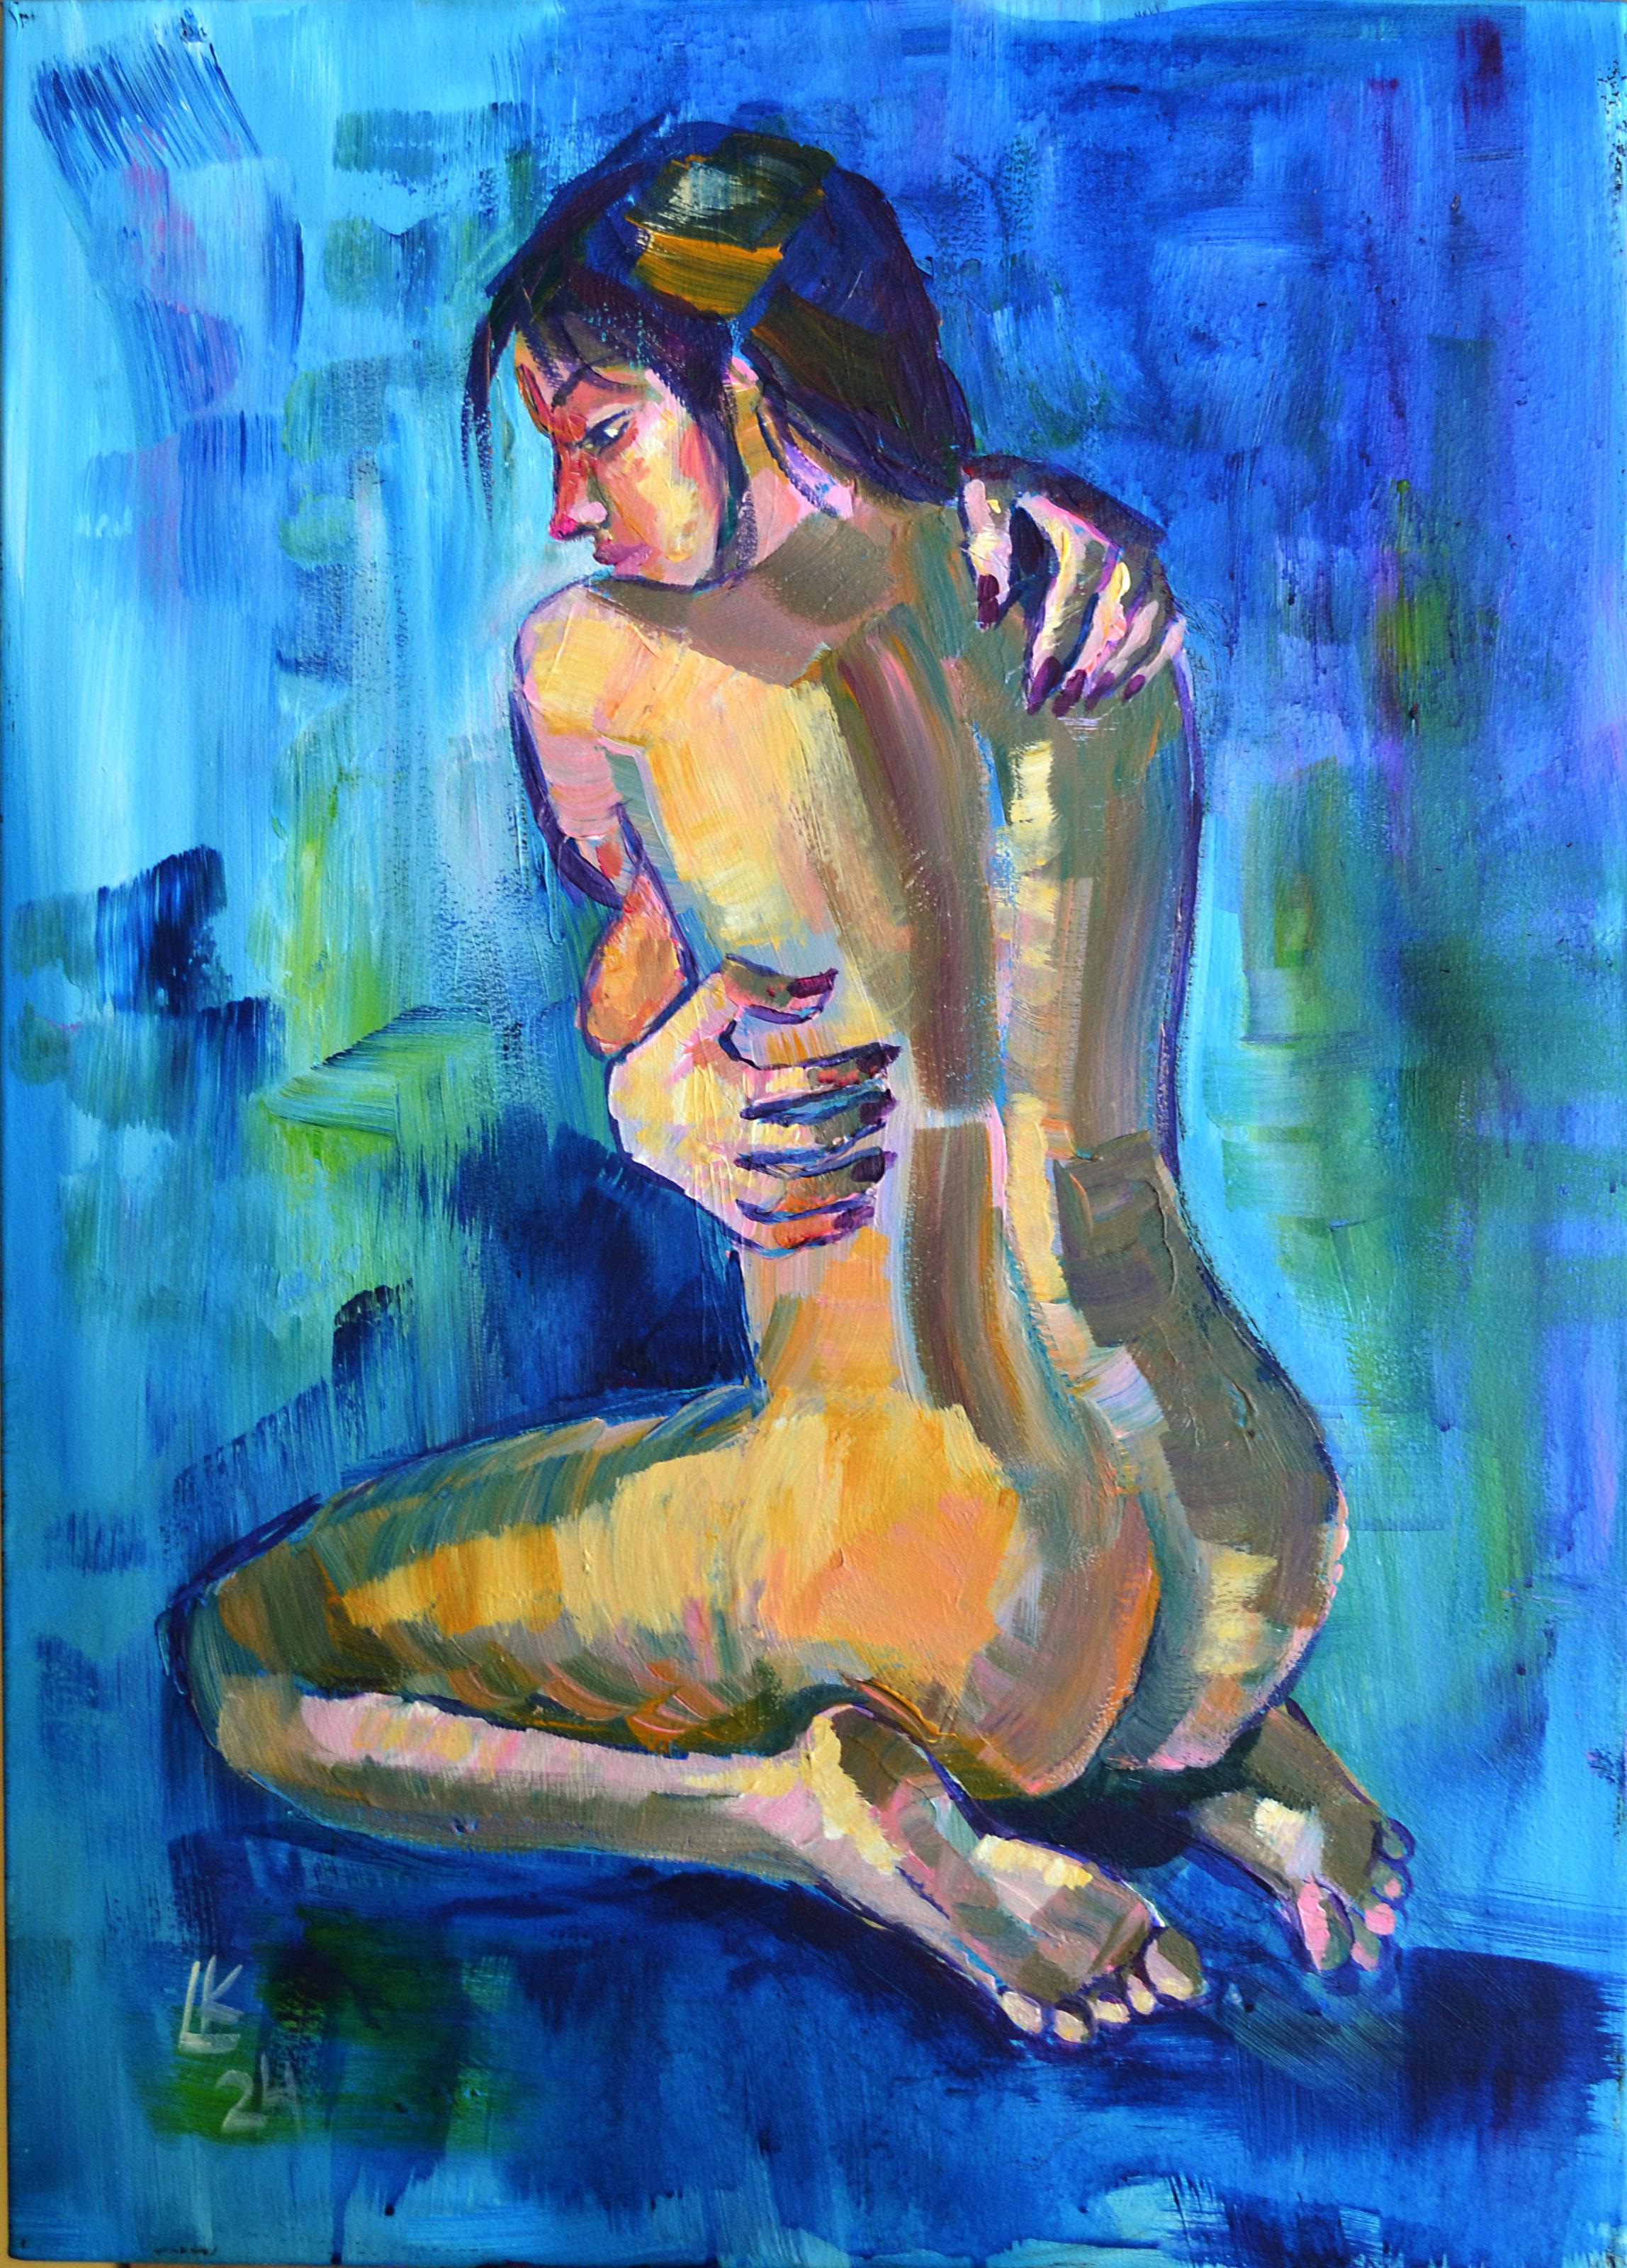 This original acrylic painting on canvas is an impressive work created by artist Lada Kholosho in 2024. It depicts a solitary figure wrapped in an embrace and rendered in a vivid palette dominated by shades of blue, which evoke the depths and